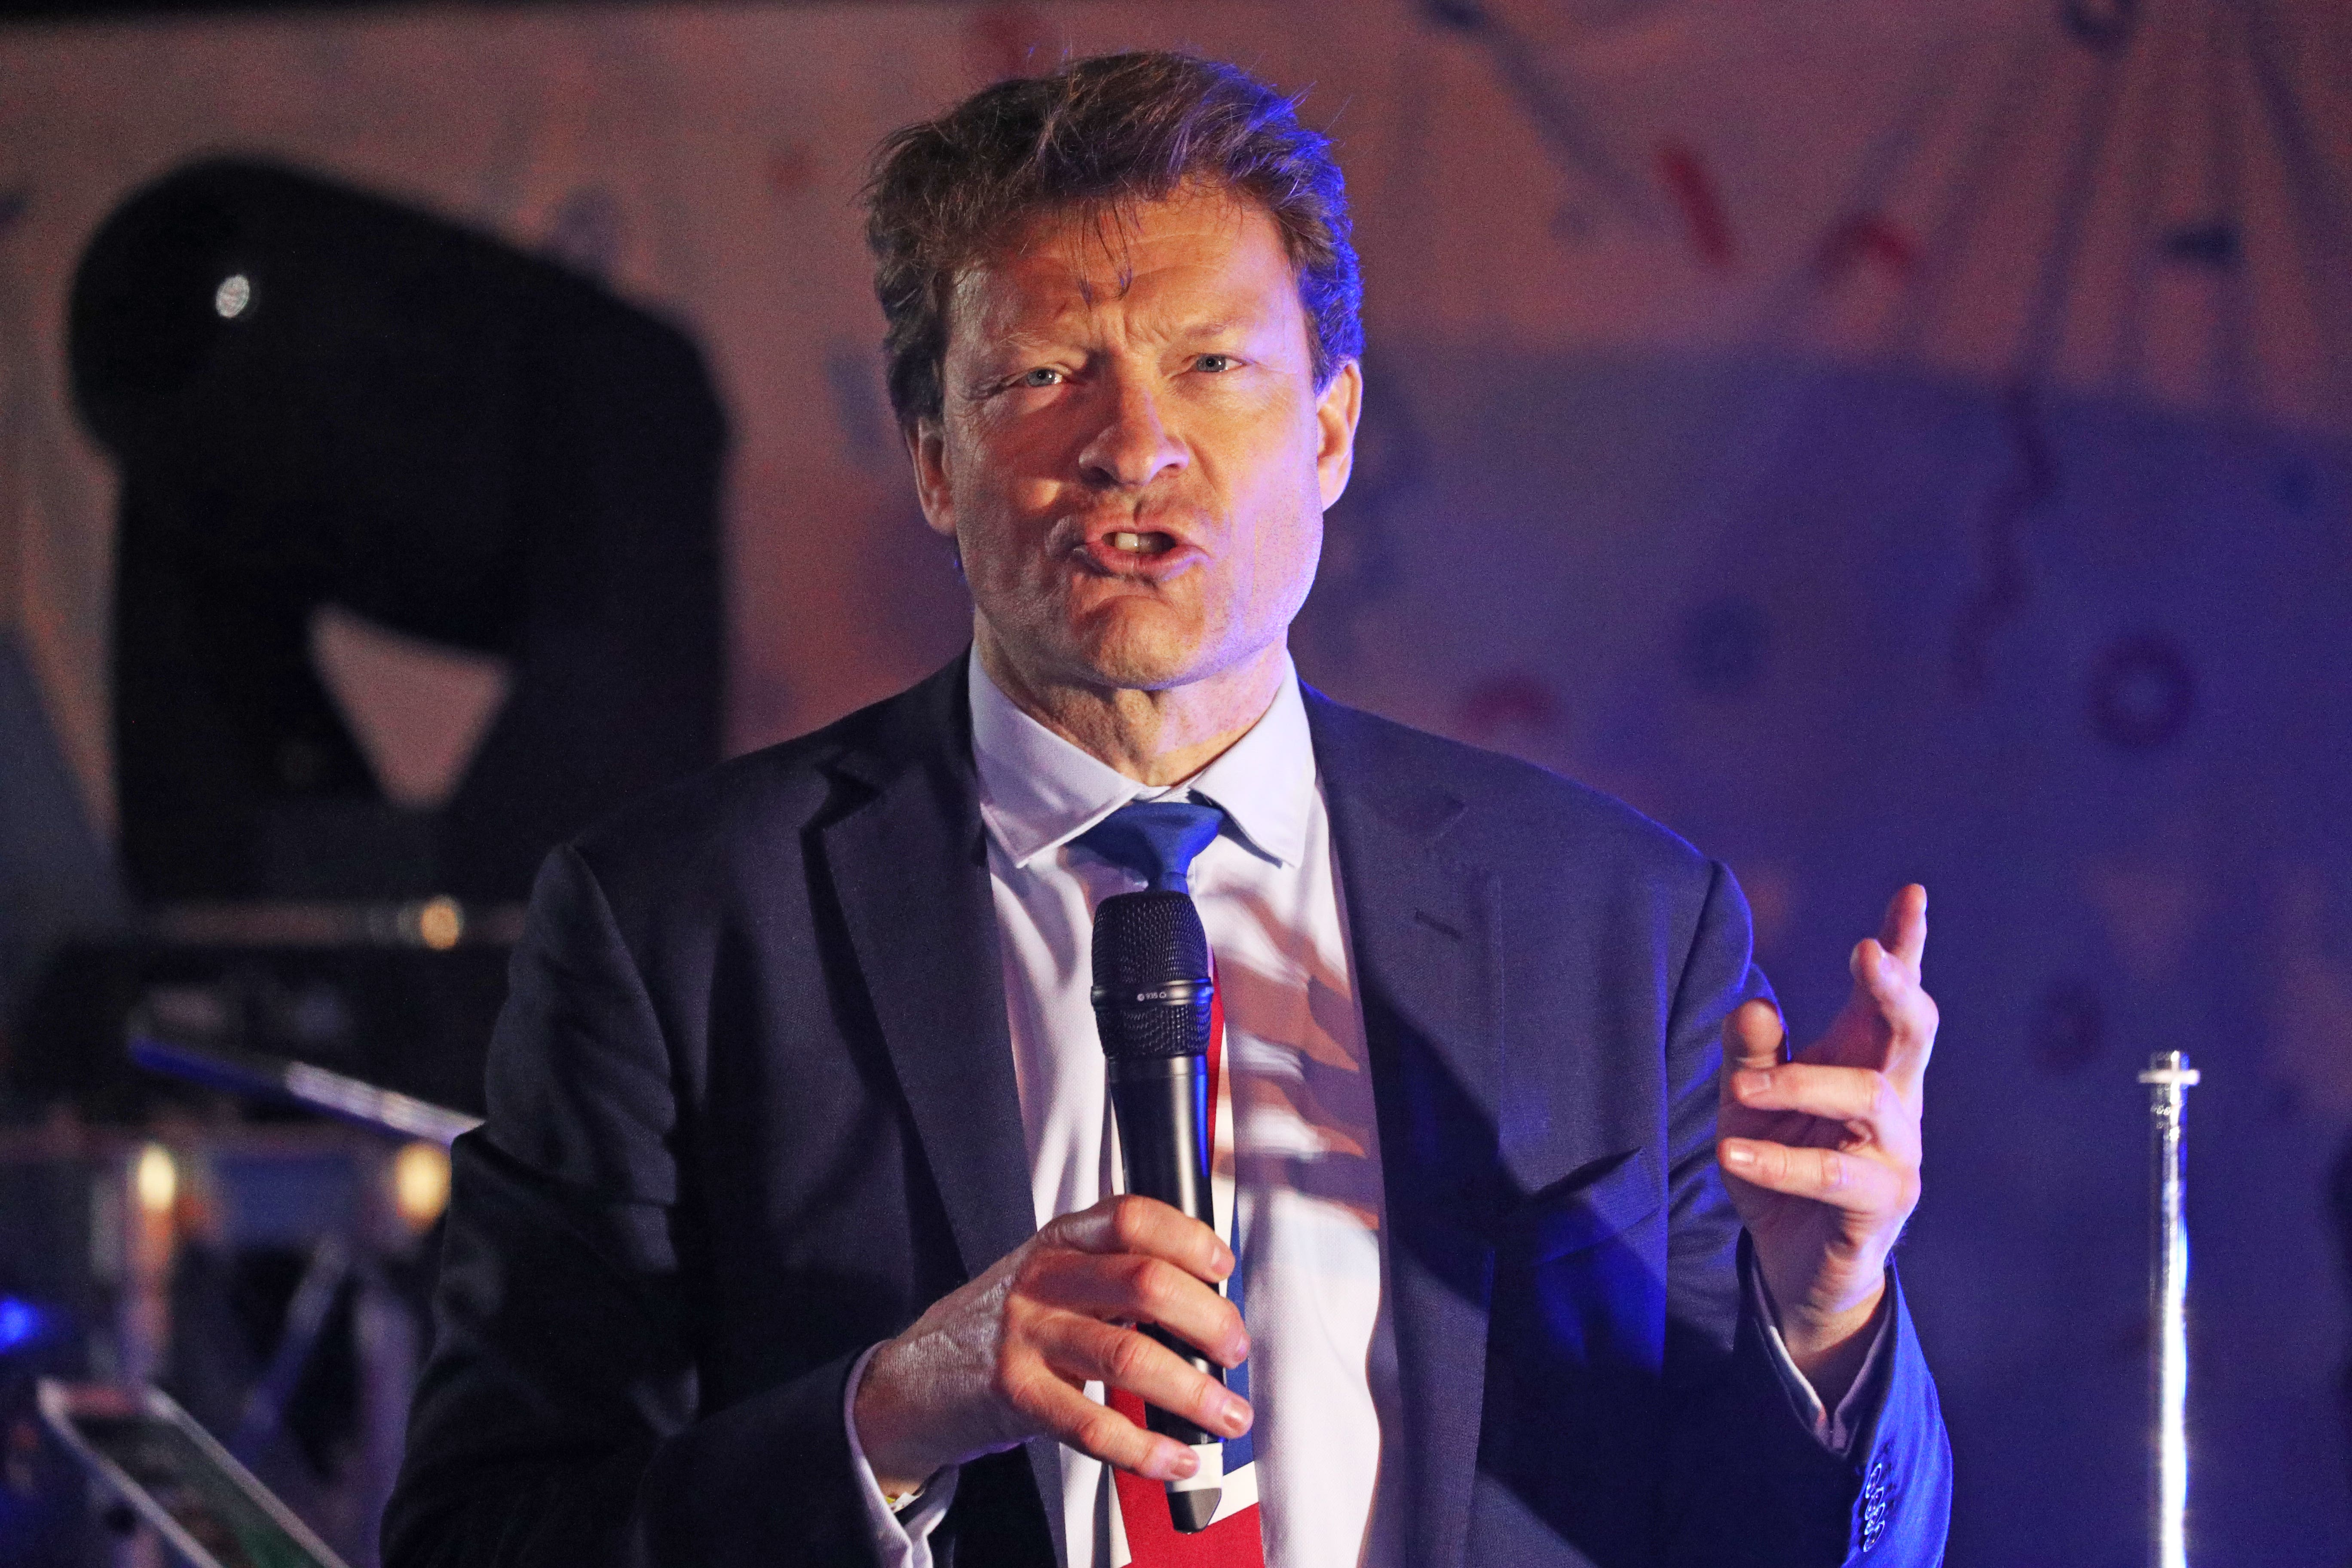 Reform UK’s Richard Tice rejected the claim money was offered